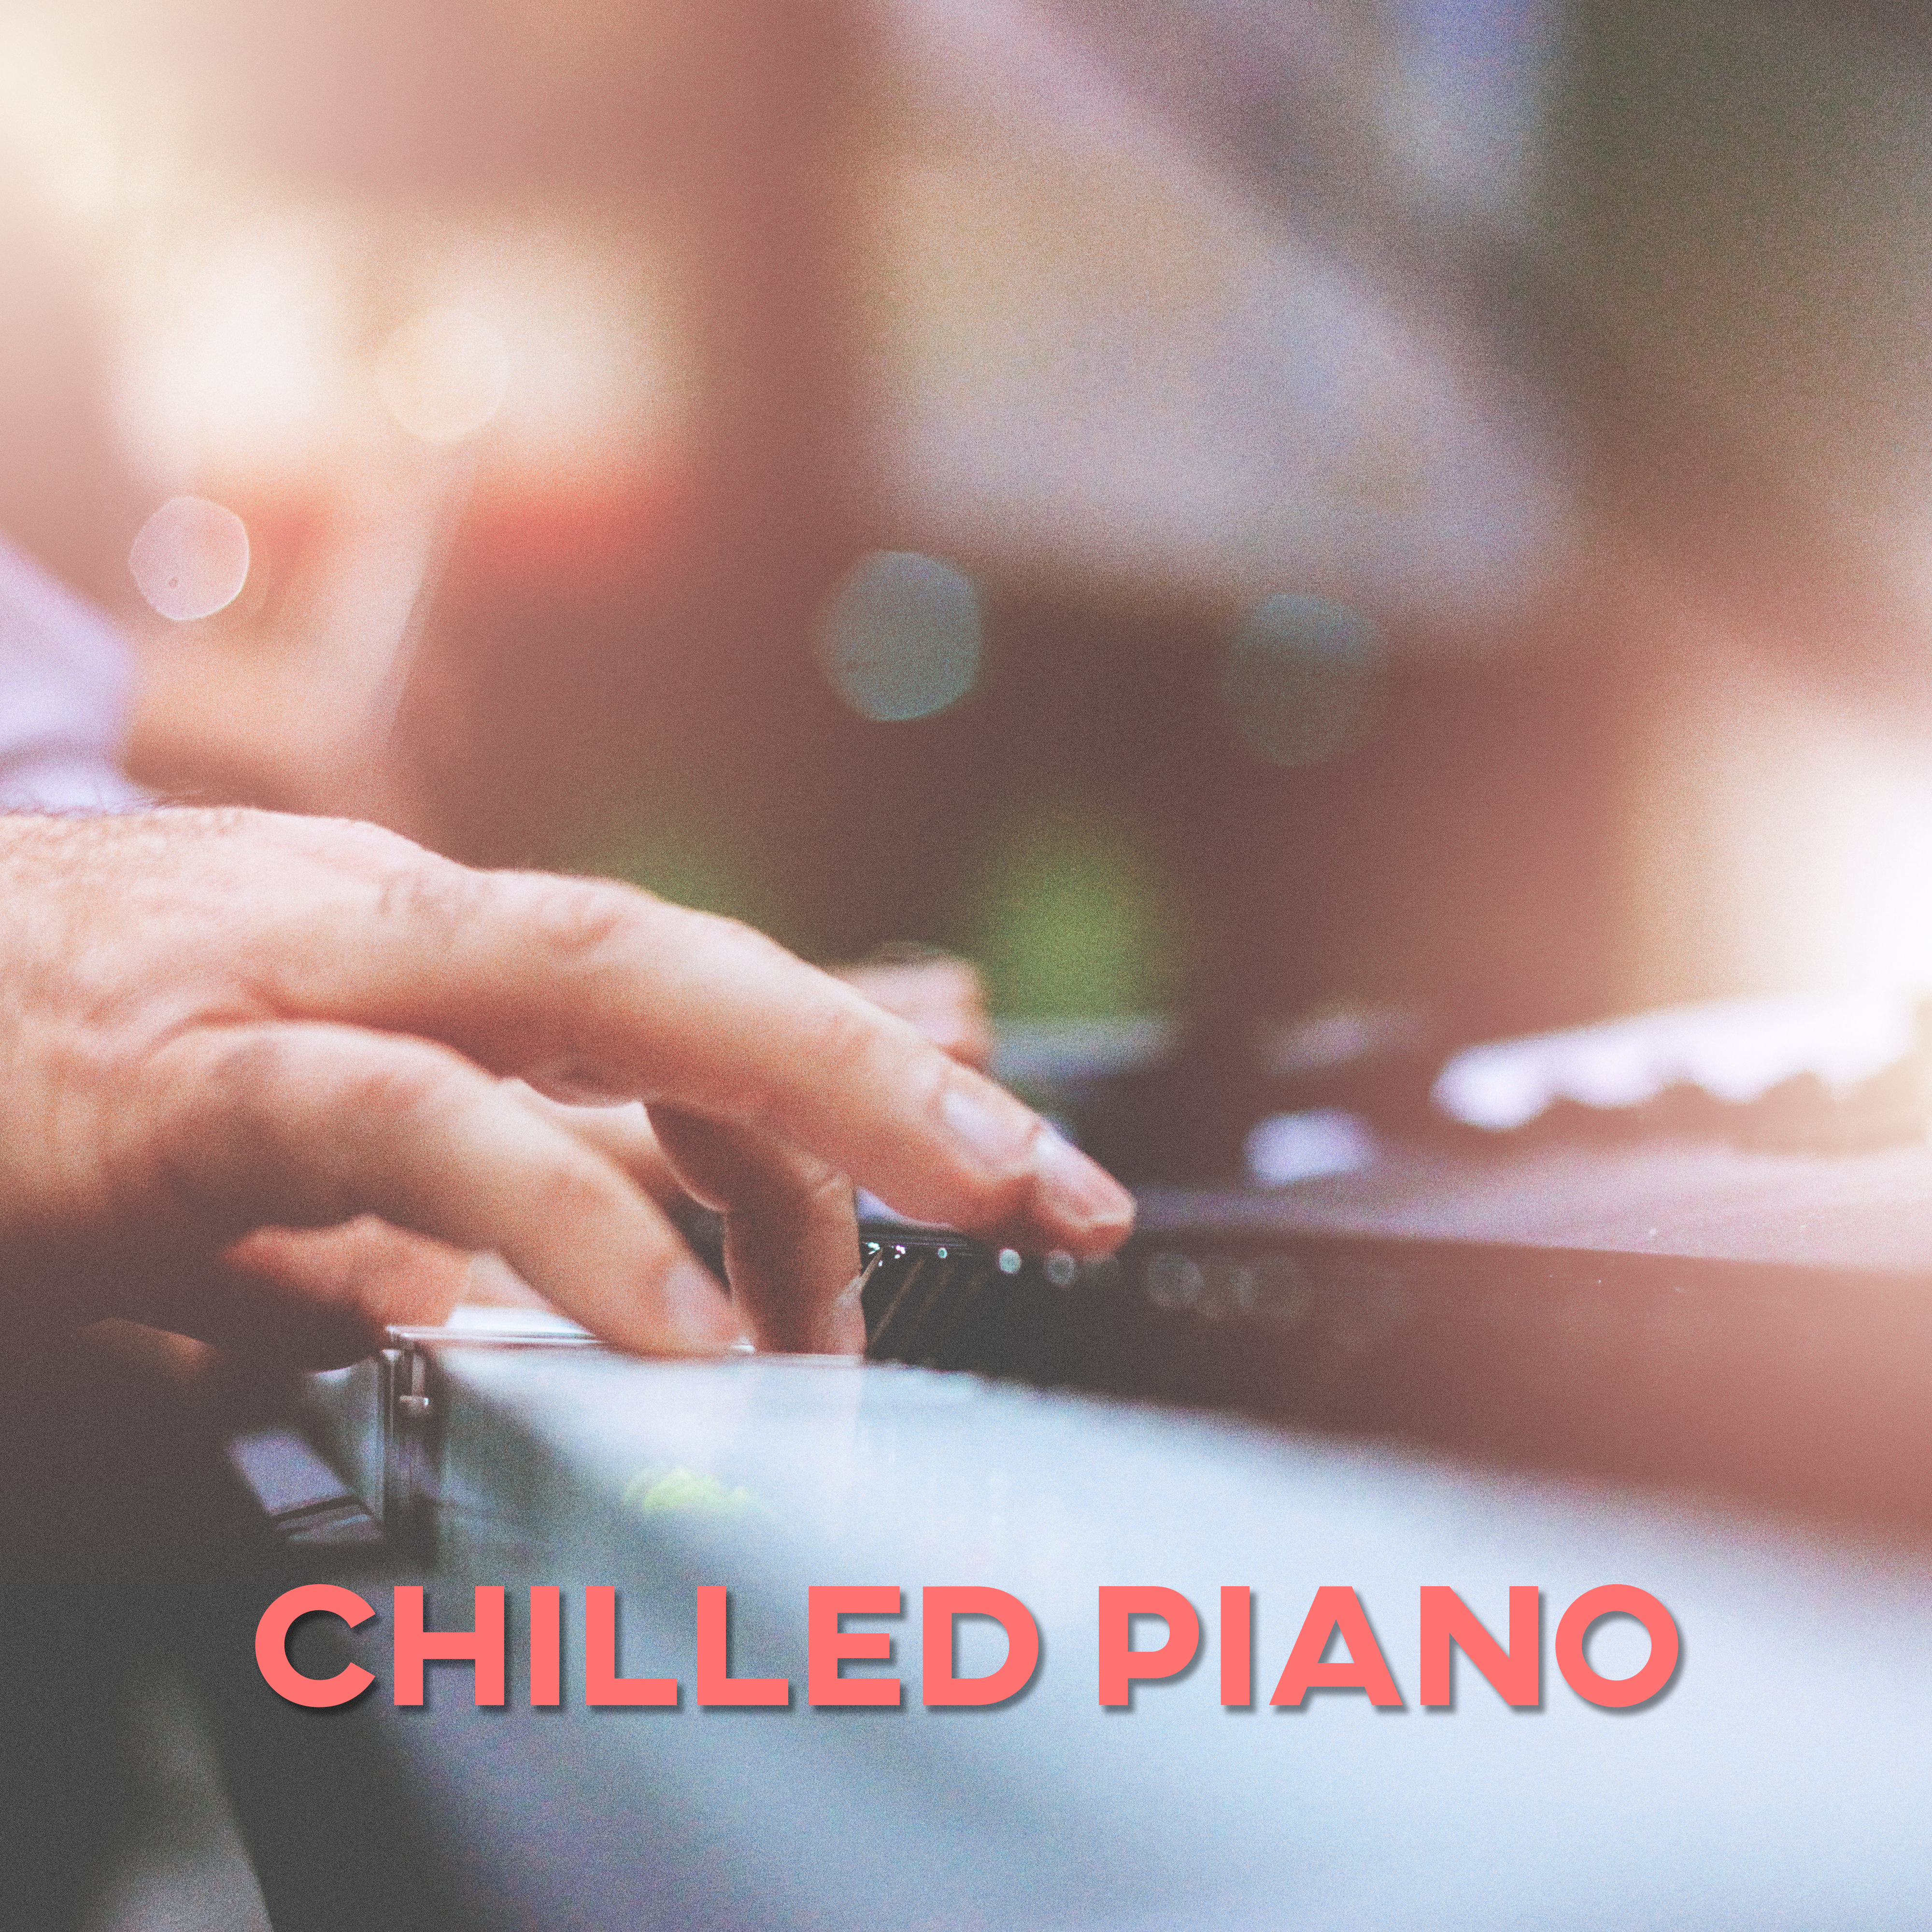 Chilled Piano - The Best Smooth Jazz, Cafe Music, Romentic Melody, Positive Tones of Instrumental Piano